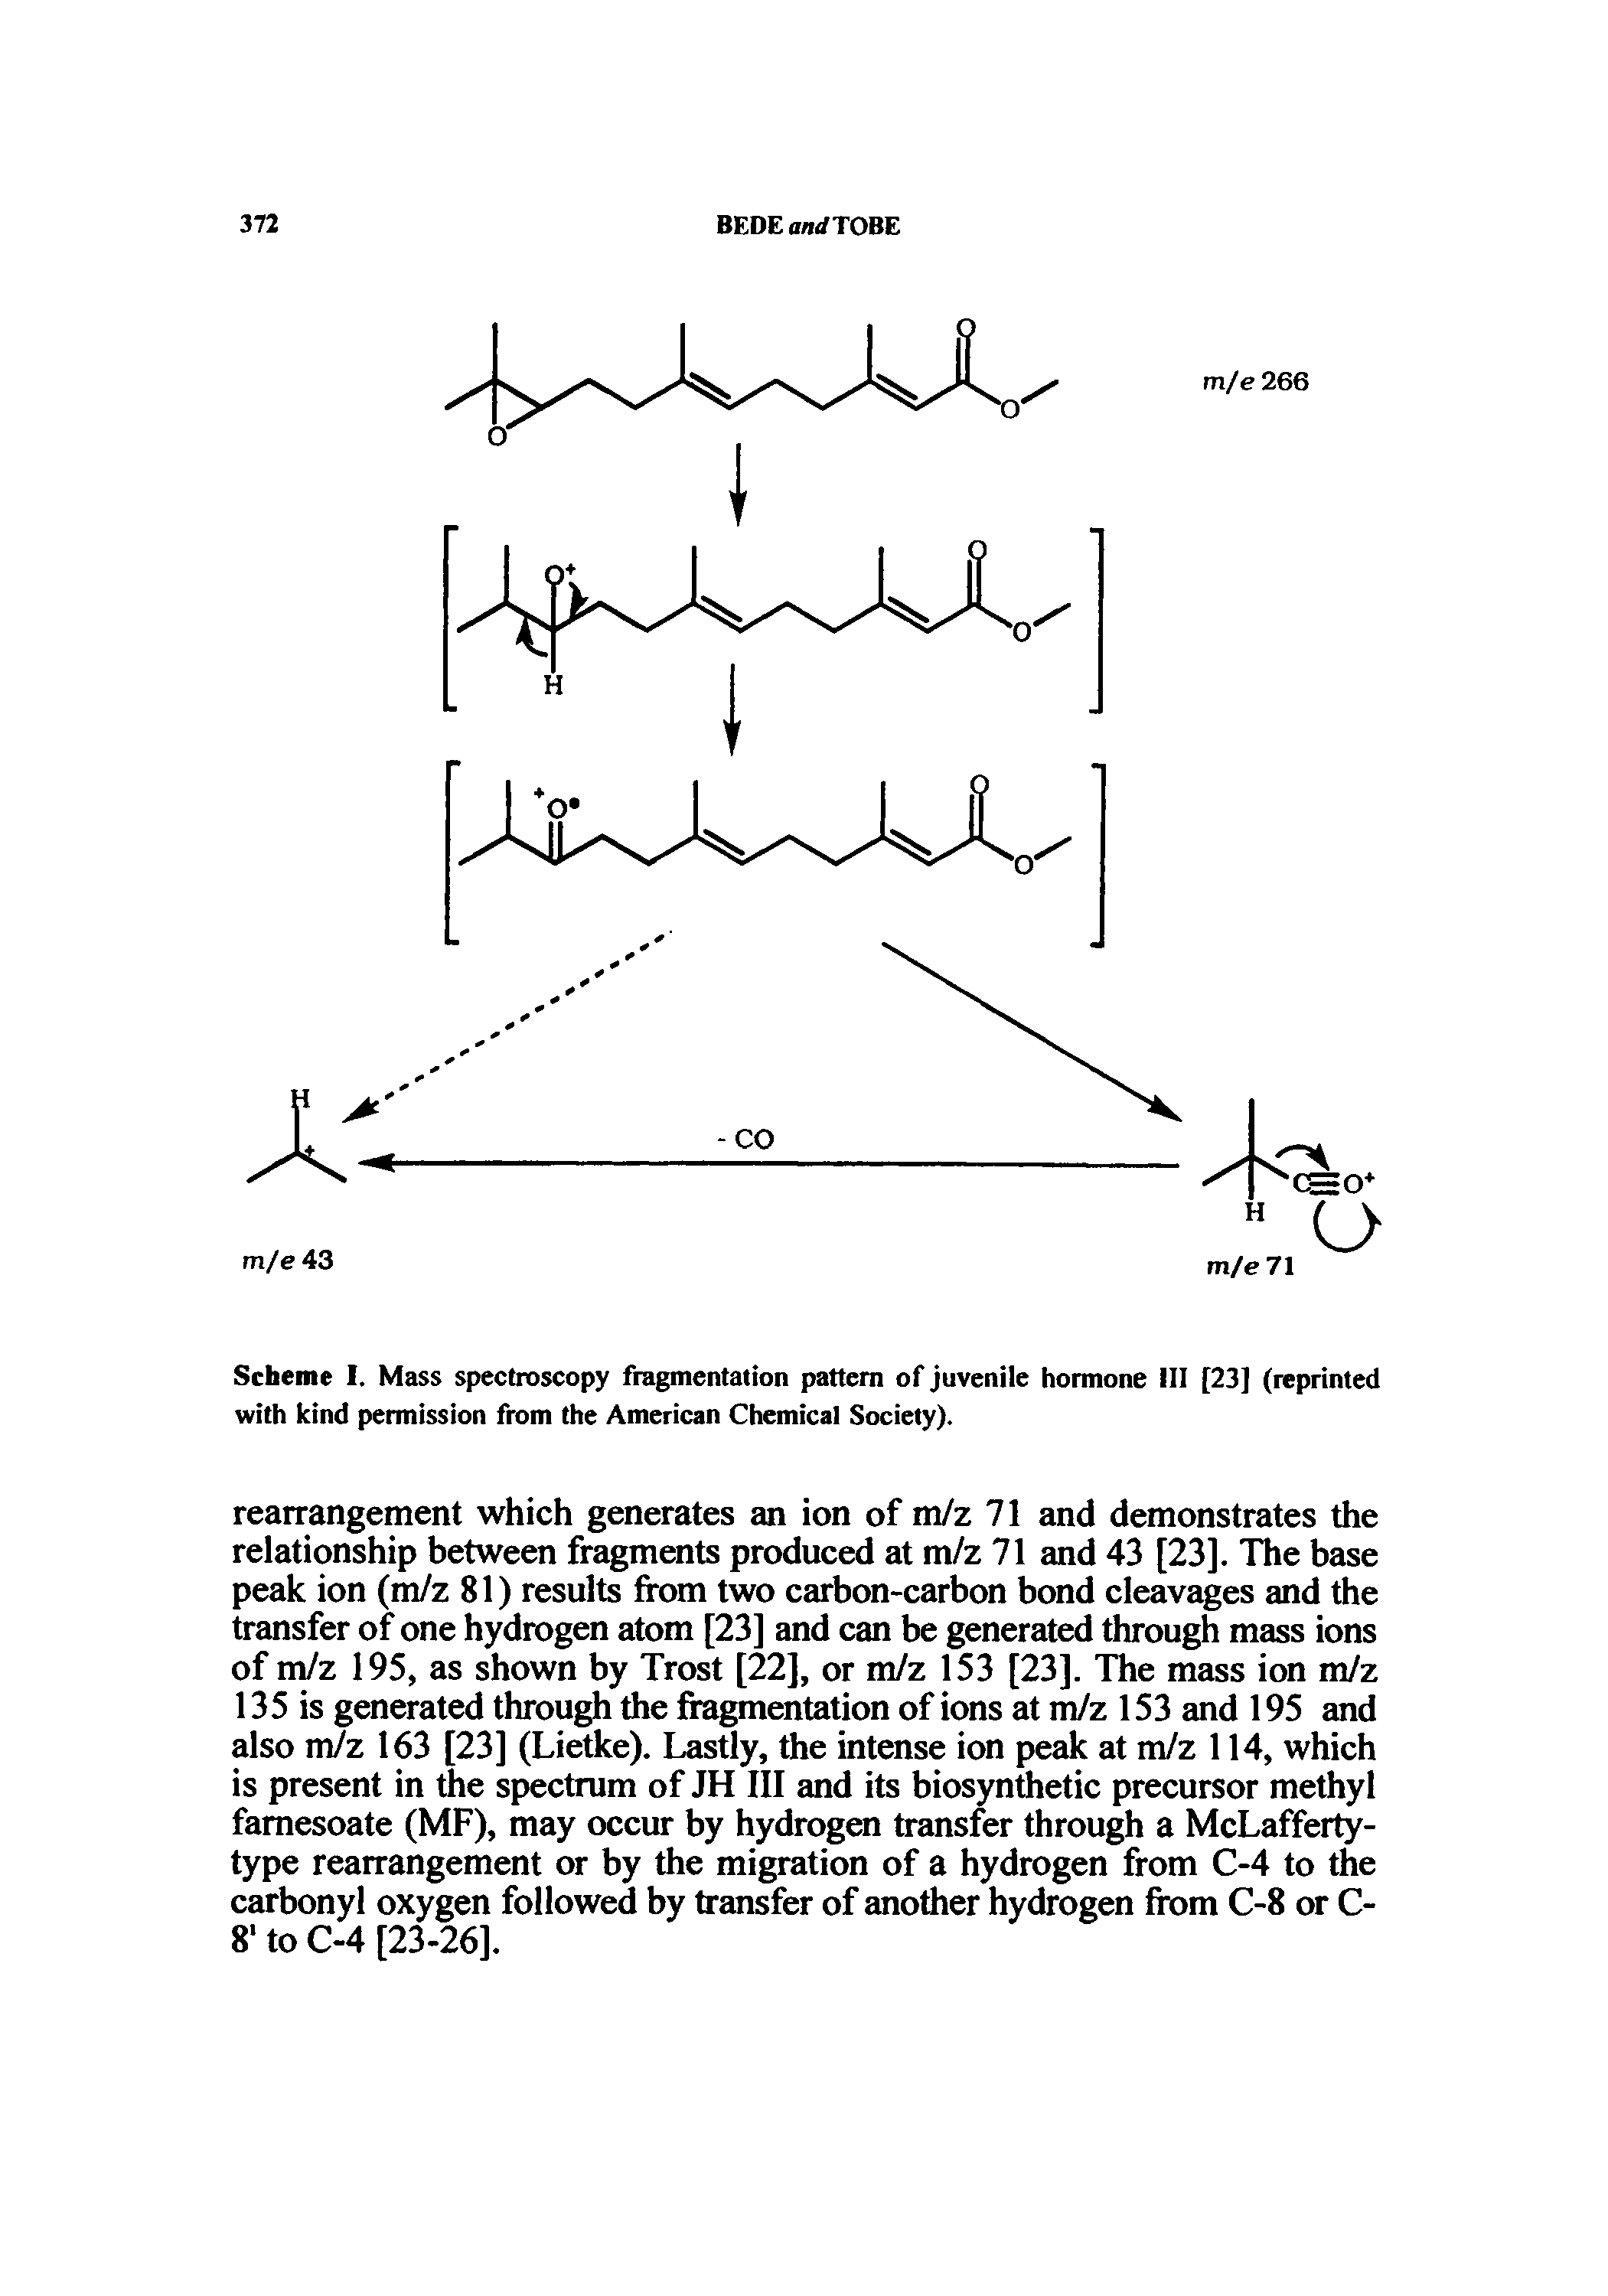 Scheme I. Mass spectroscopy fragmentation pattern of juvenile hormone III [23] (reprinted with kind permission from the American Chemical Society).